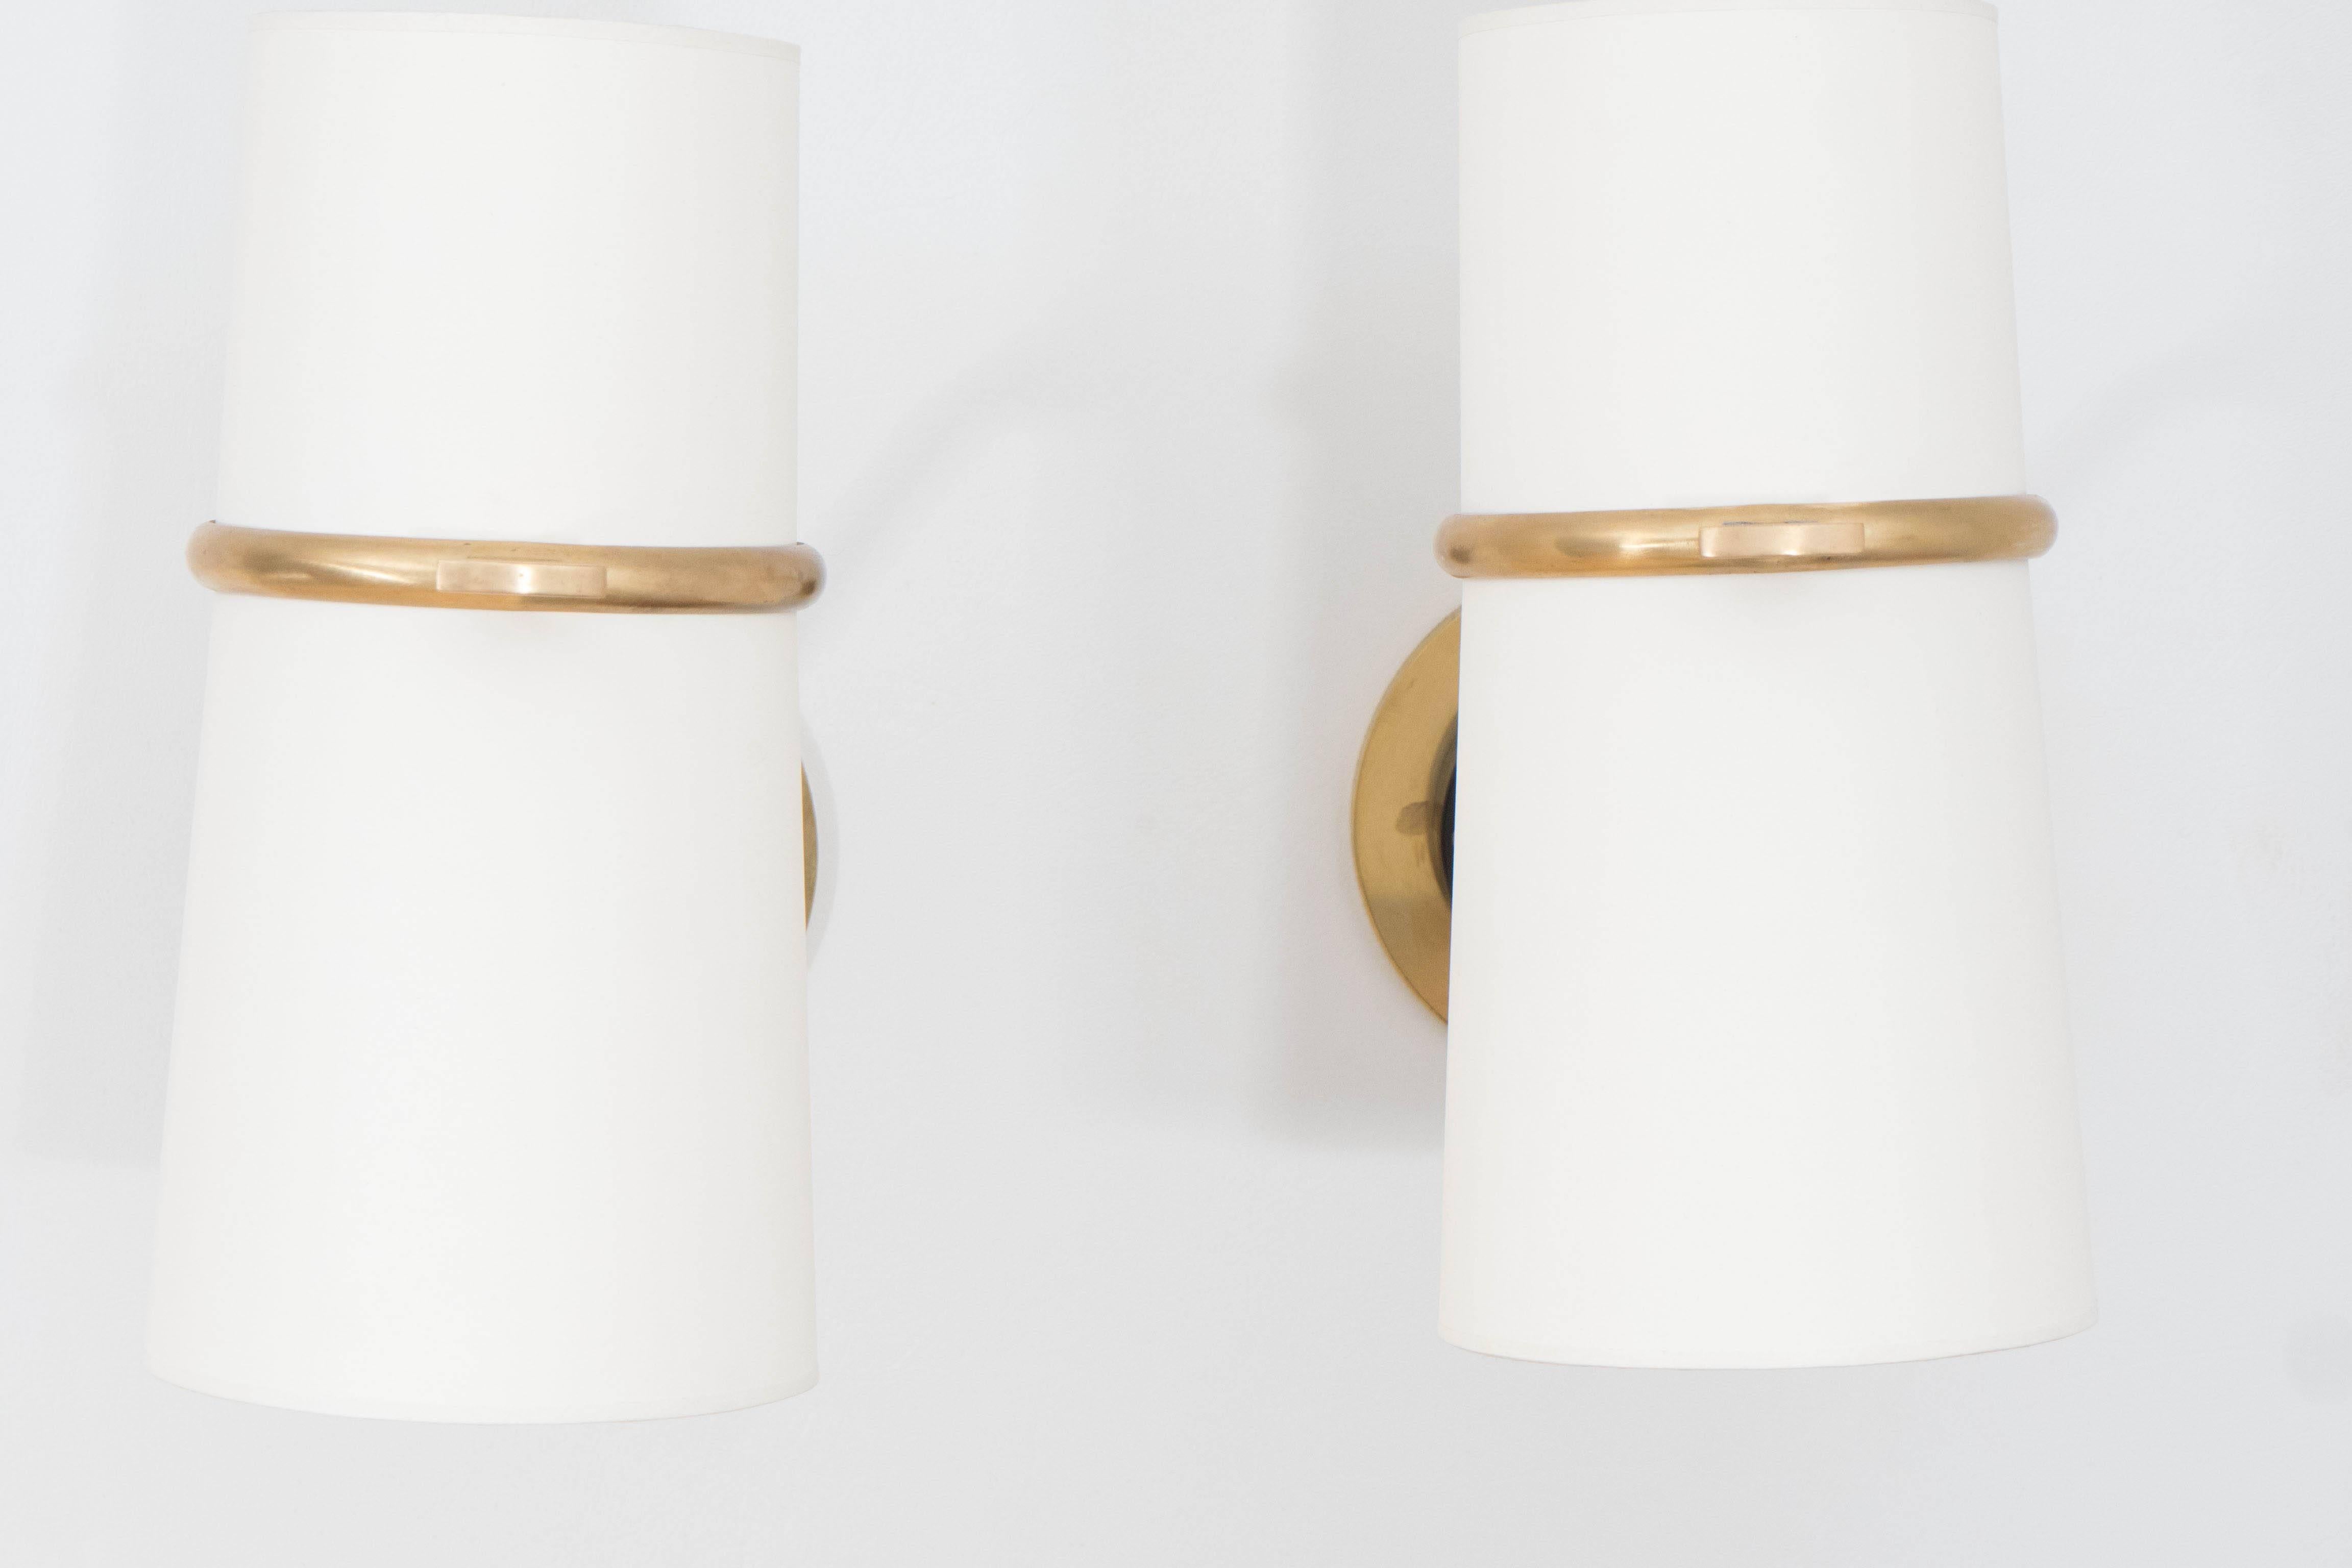 Pair of sconces from French designer Boris Lacroix. Articulated double
shades with double sockets for maximum illumination.